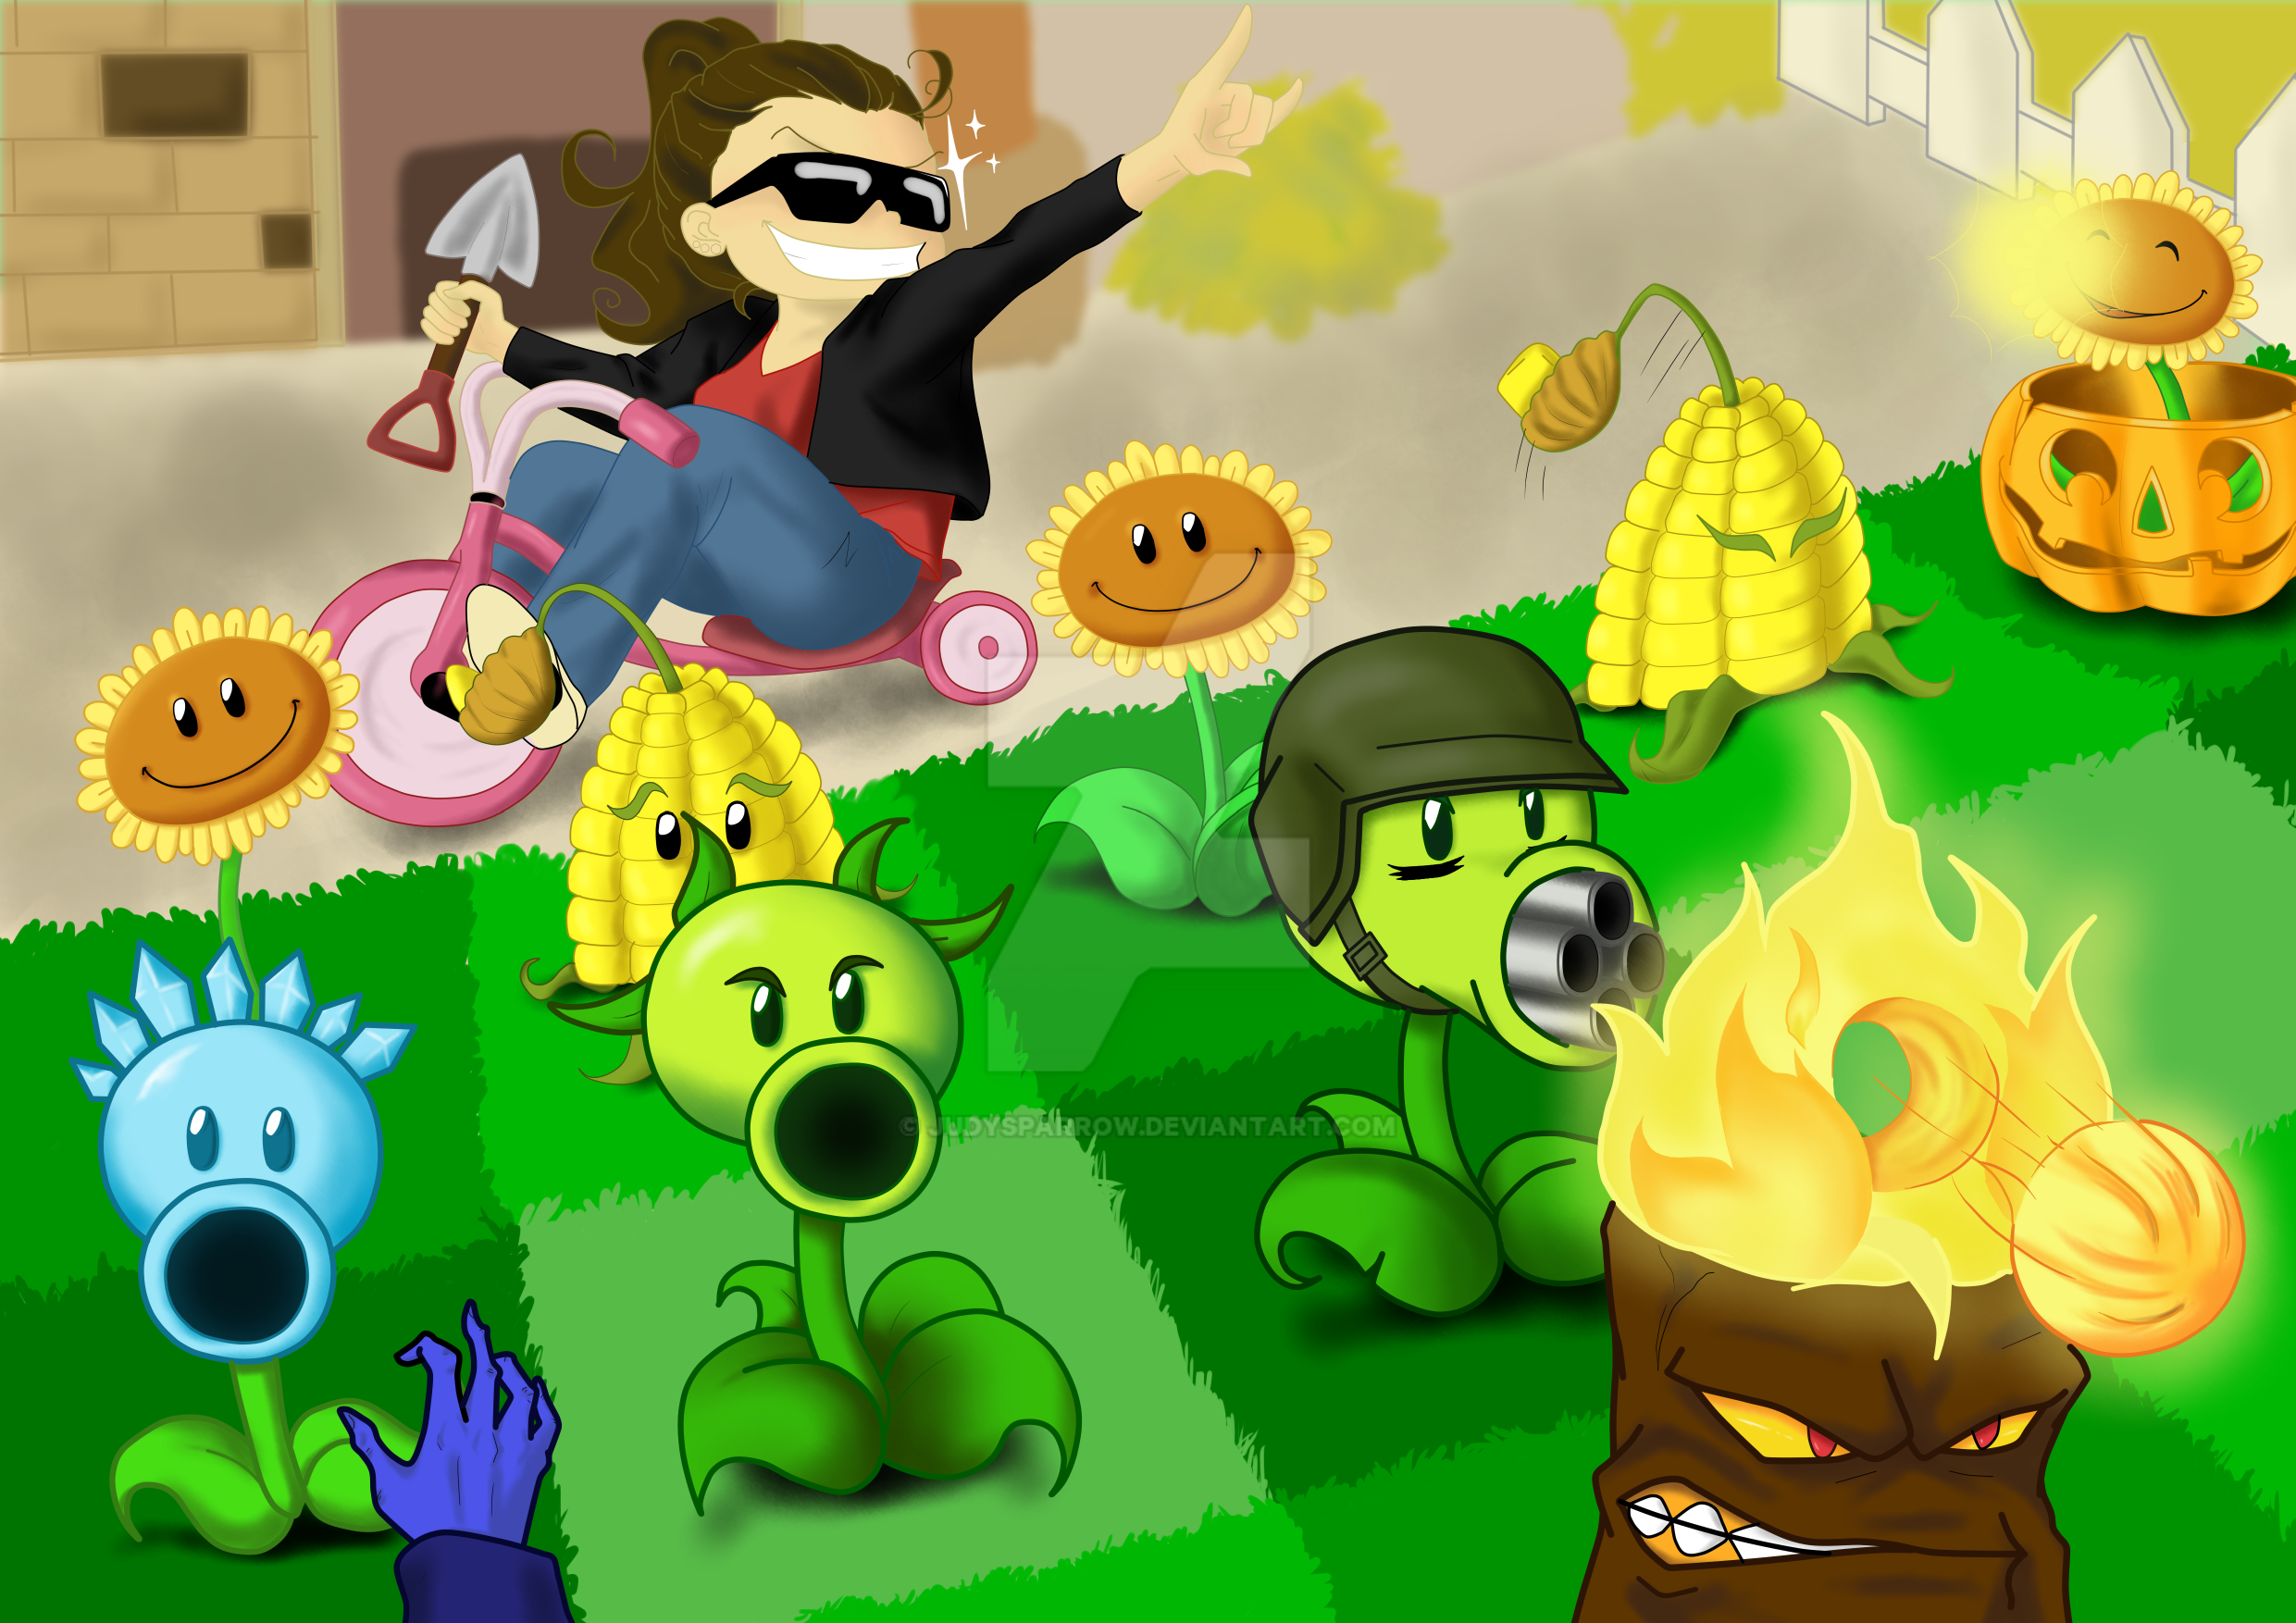 Me, playing Plants vs. Zombies by JudySparrow on DeviantArt.